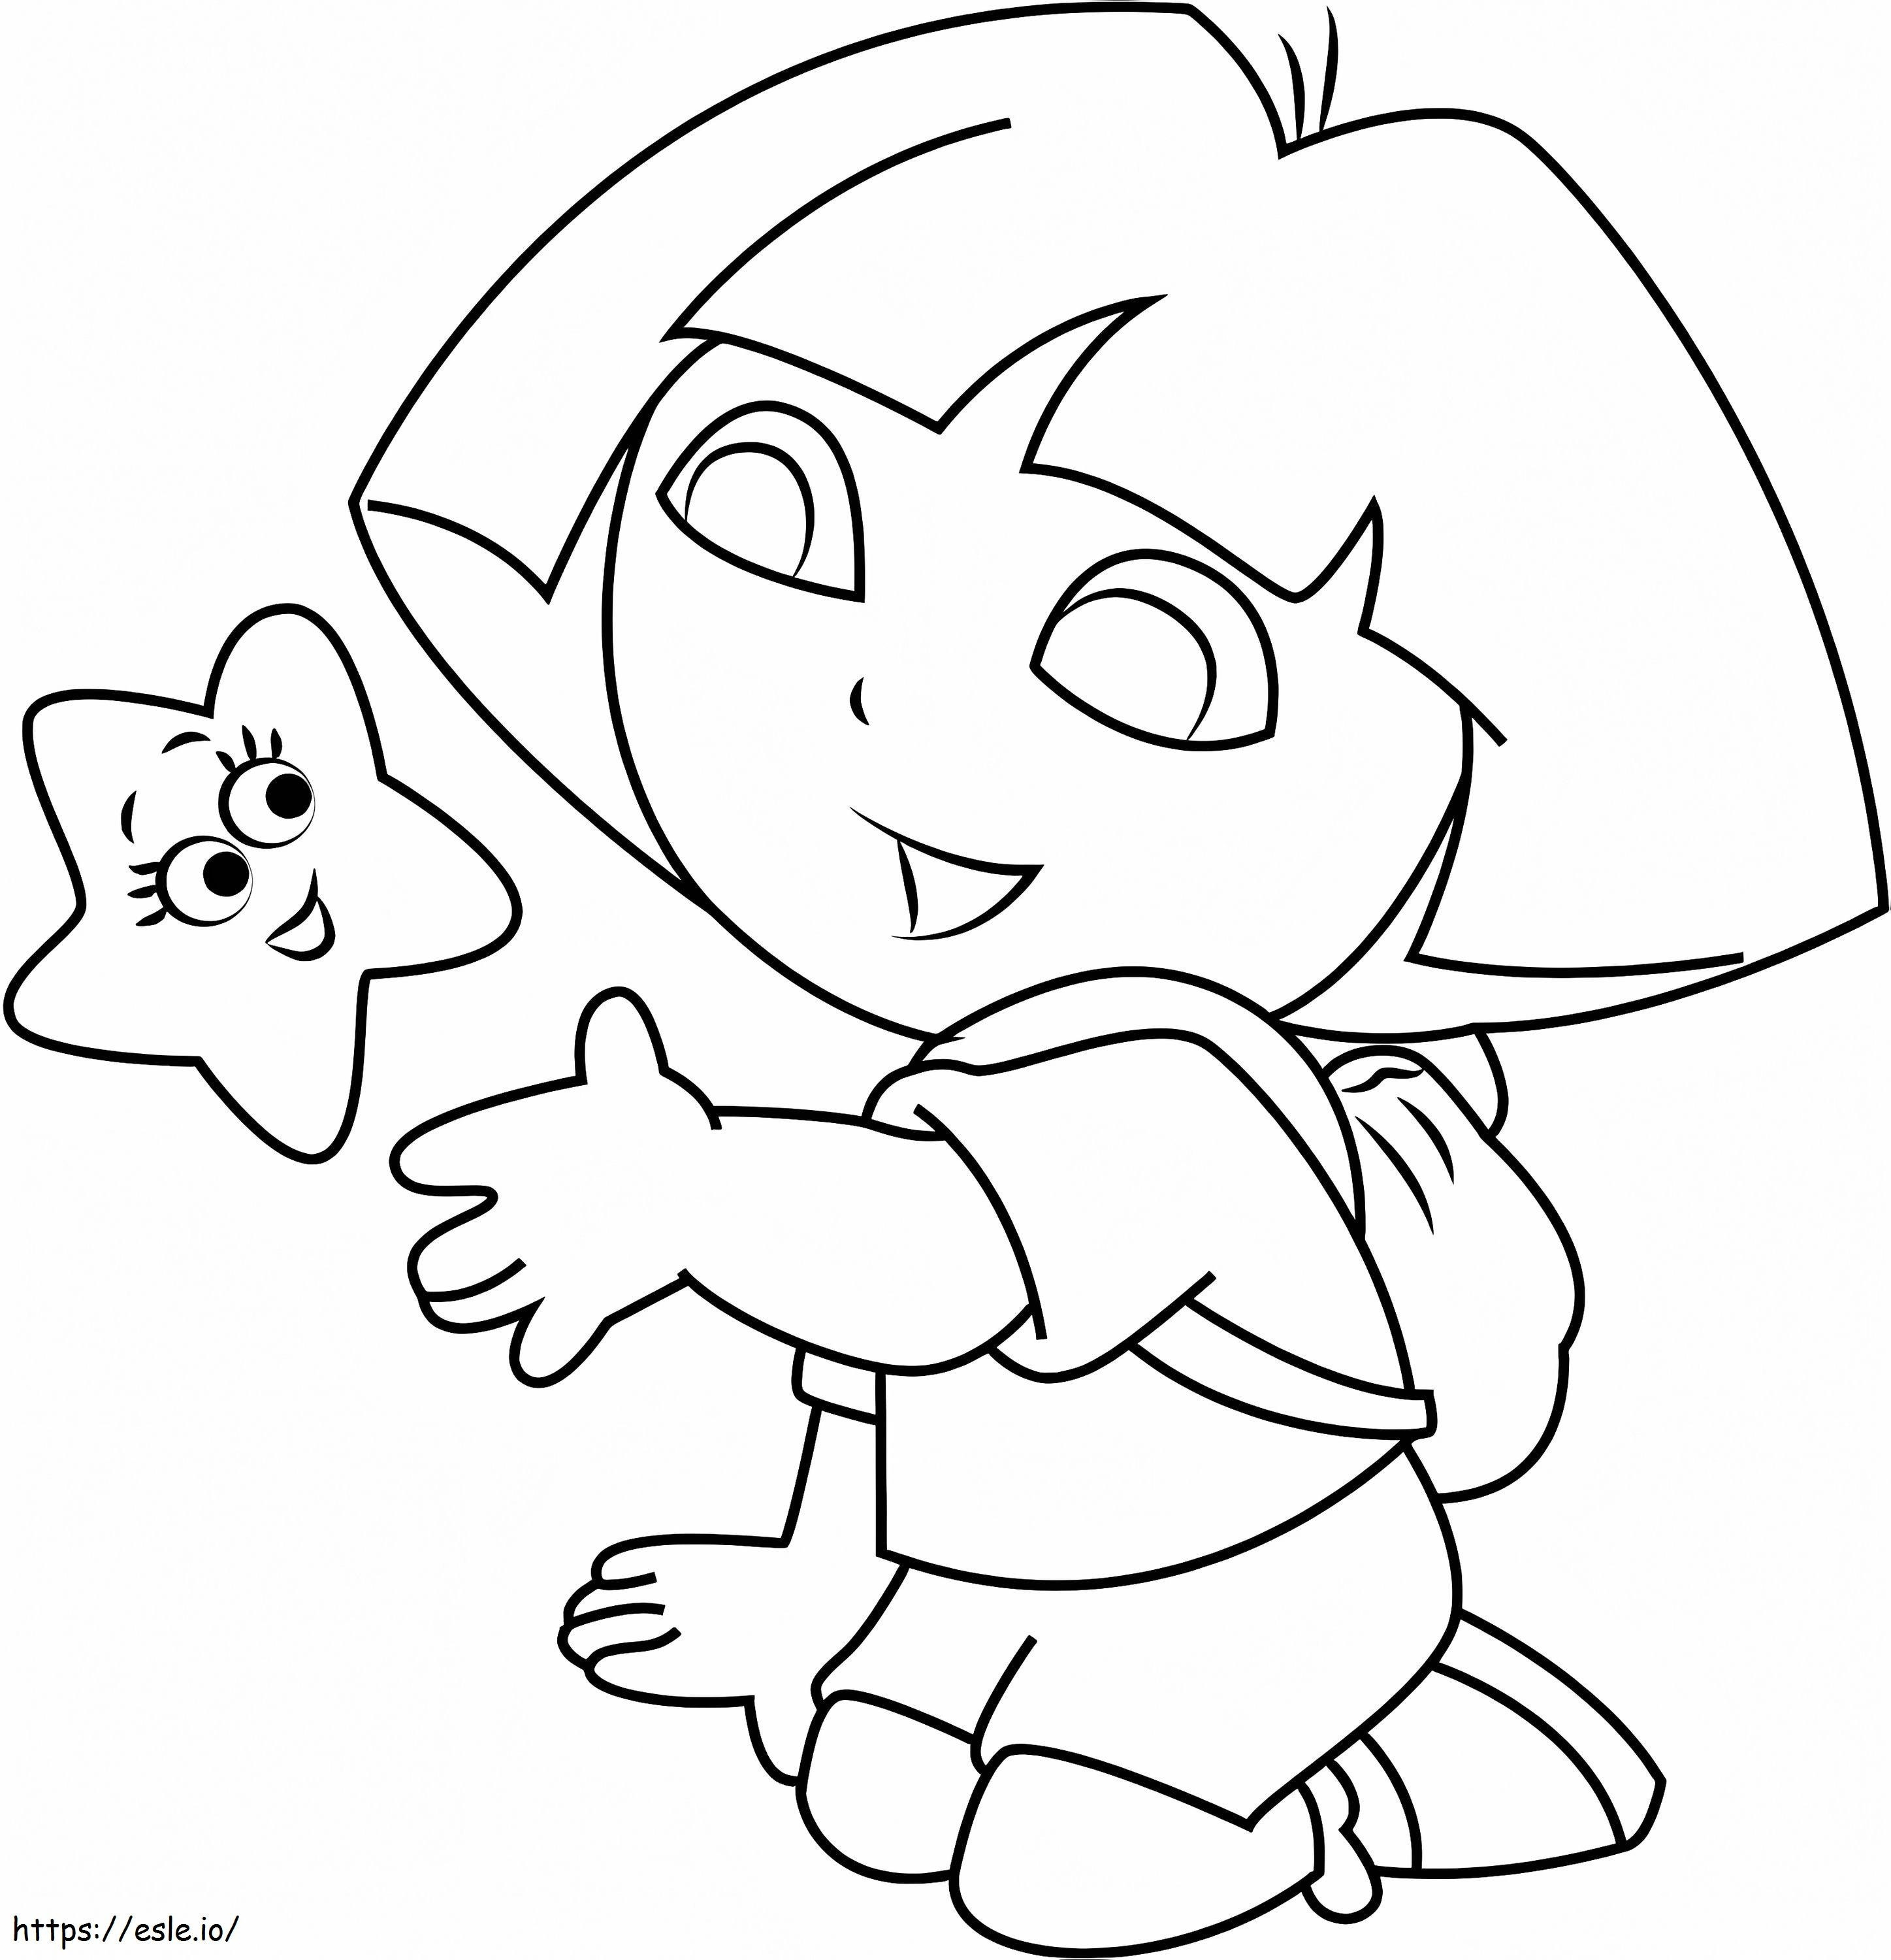 Dora With Cartoon Star coloring page